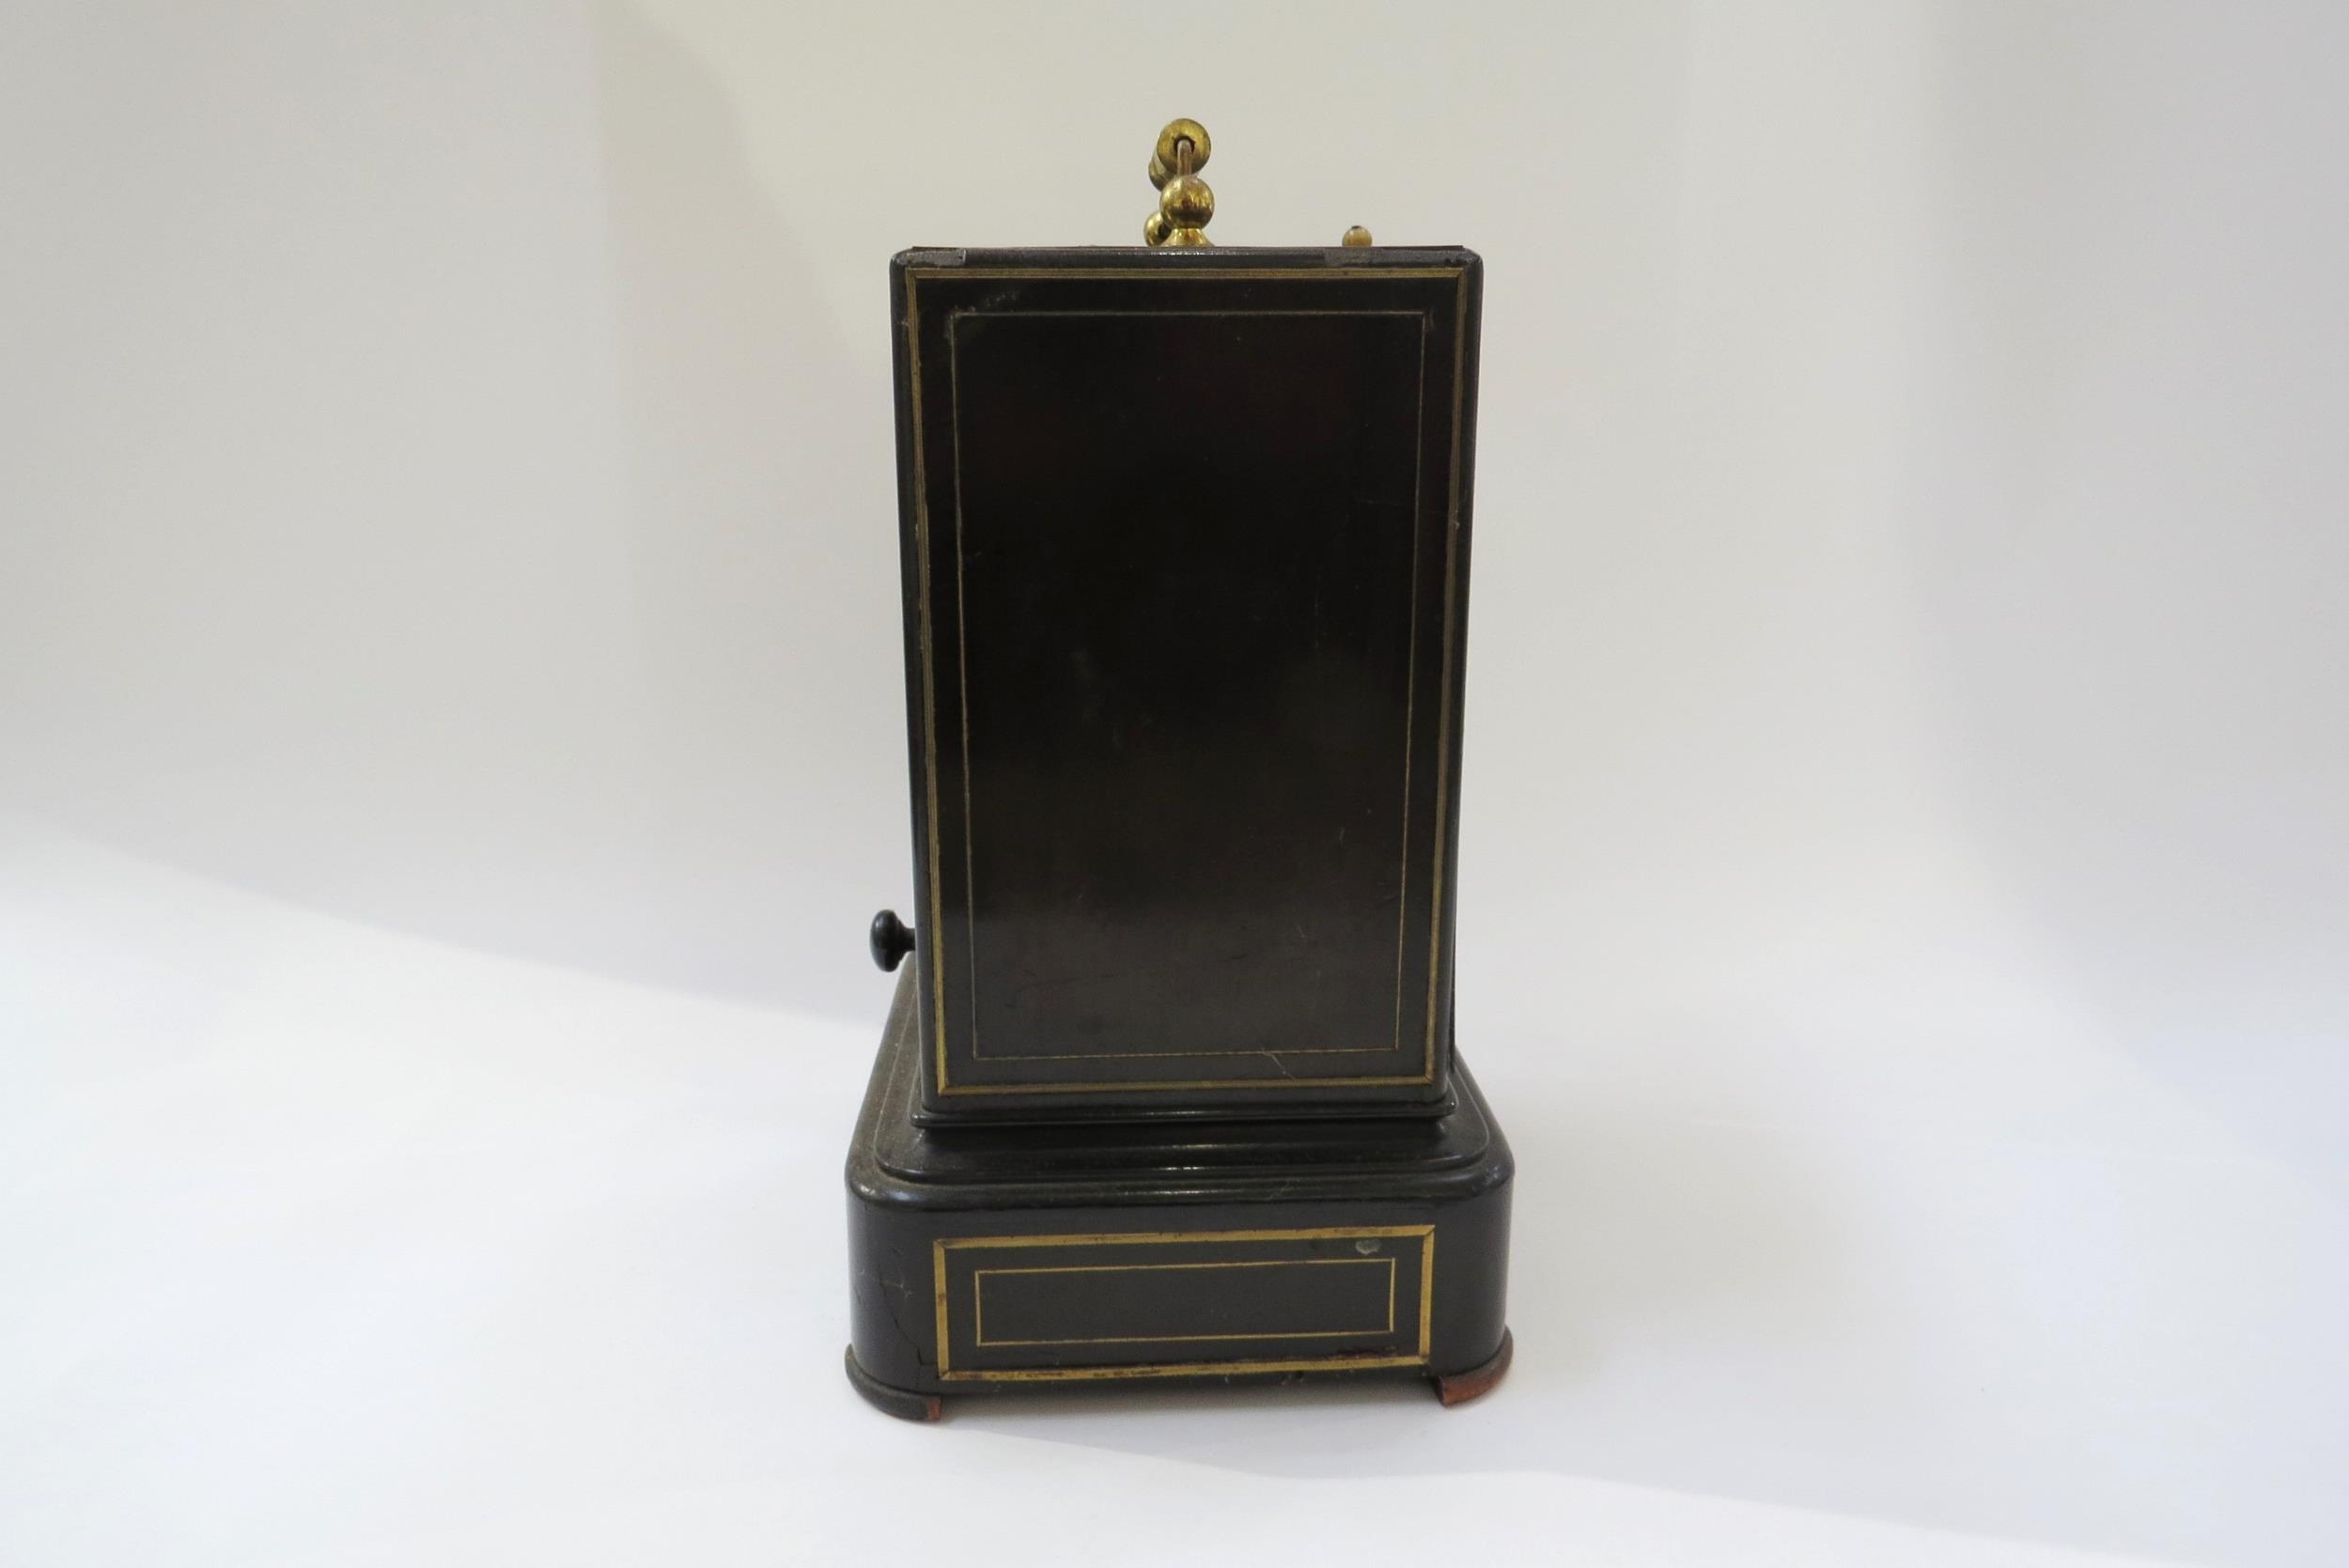 Laine a Paris two train mantel/bracket clock striking on a bell in mahogany and brass inlaid case, - Image 7 of 9